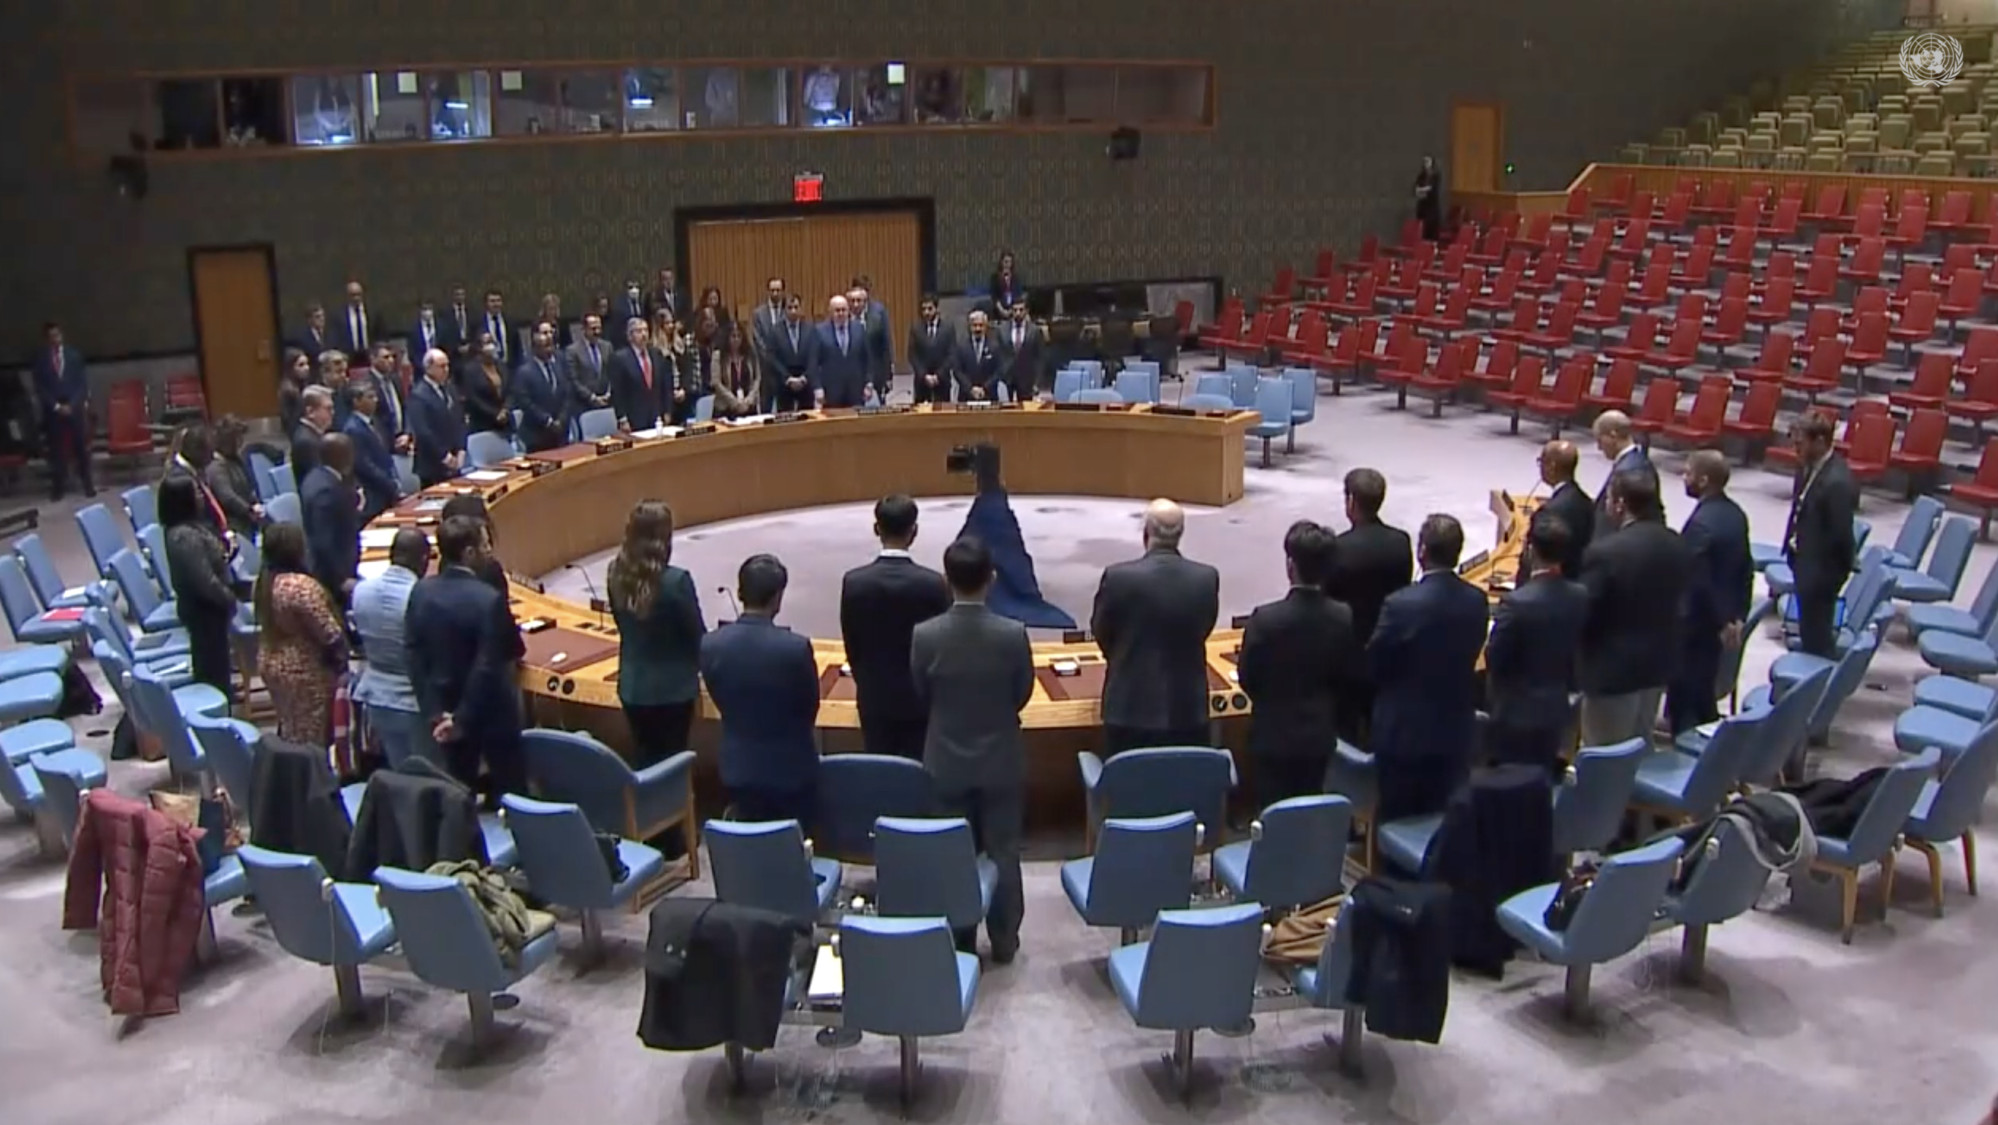 Delegates to the United Nations Security Council rise to observe a minute of silence for Jiang Zemin on Wednesday in New York.